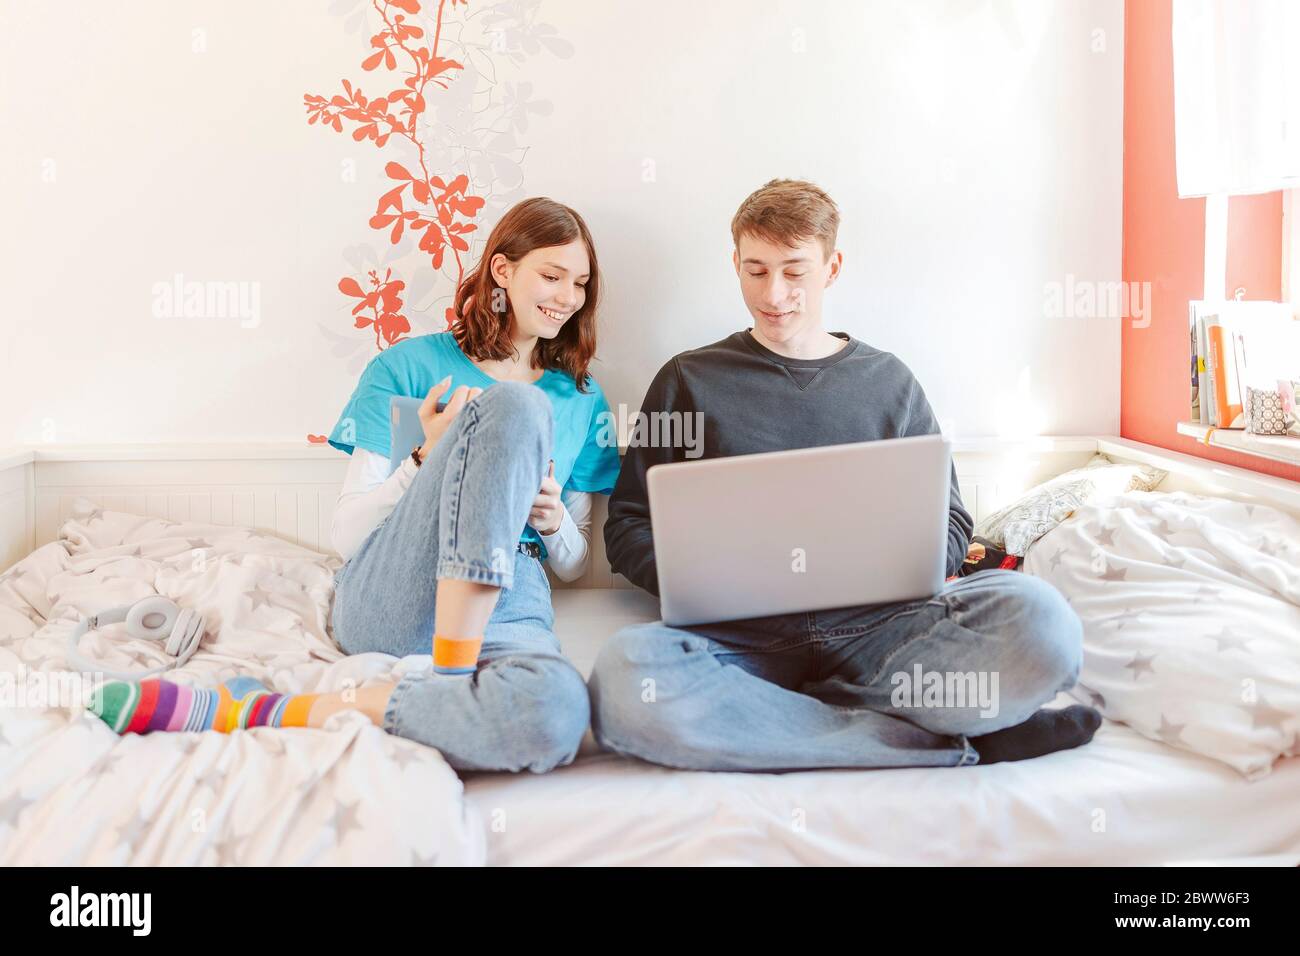 Portrait of teenage couple sitting together on bed learning with laptop Stock Photo